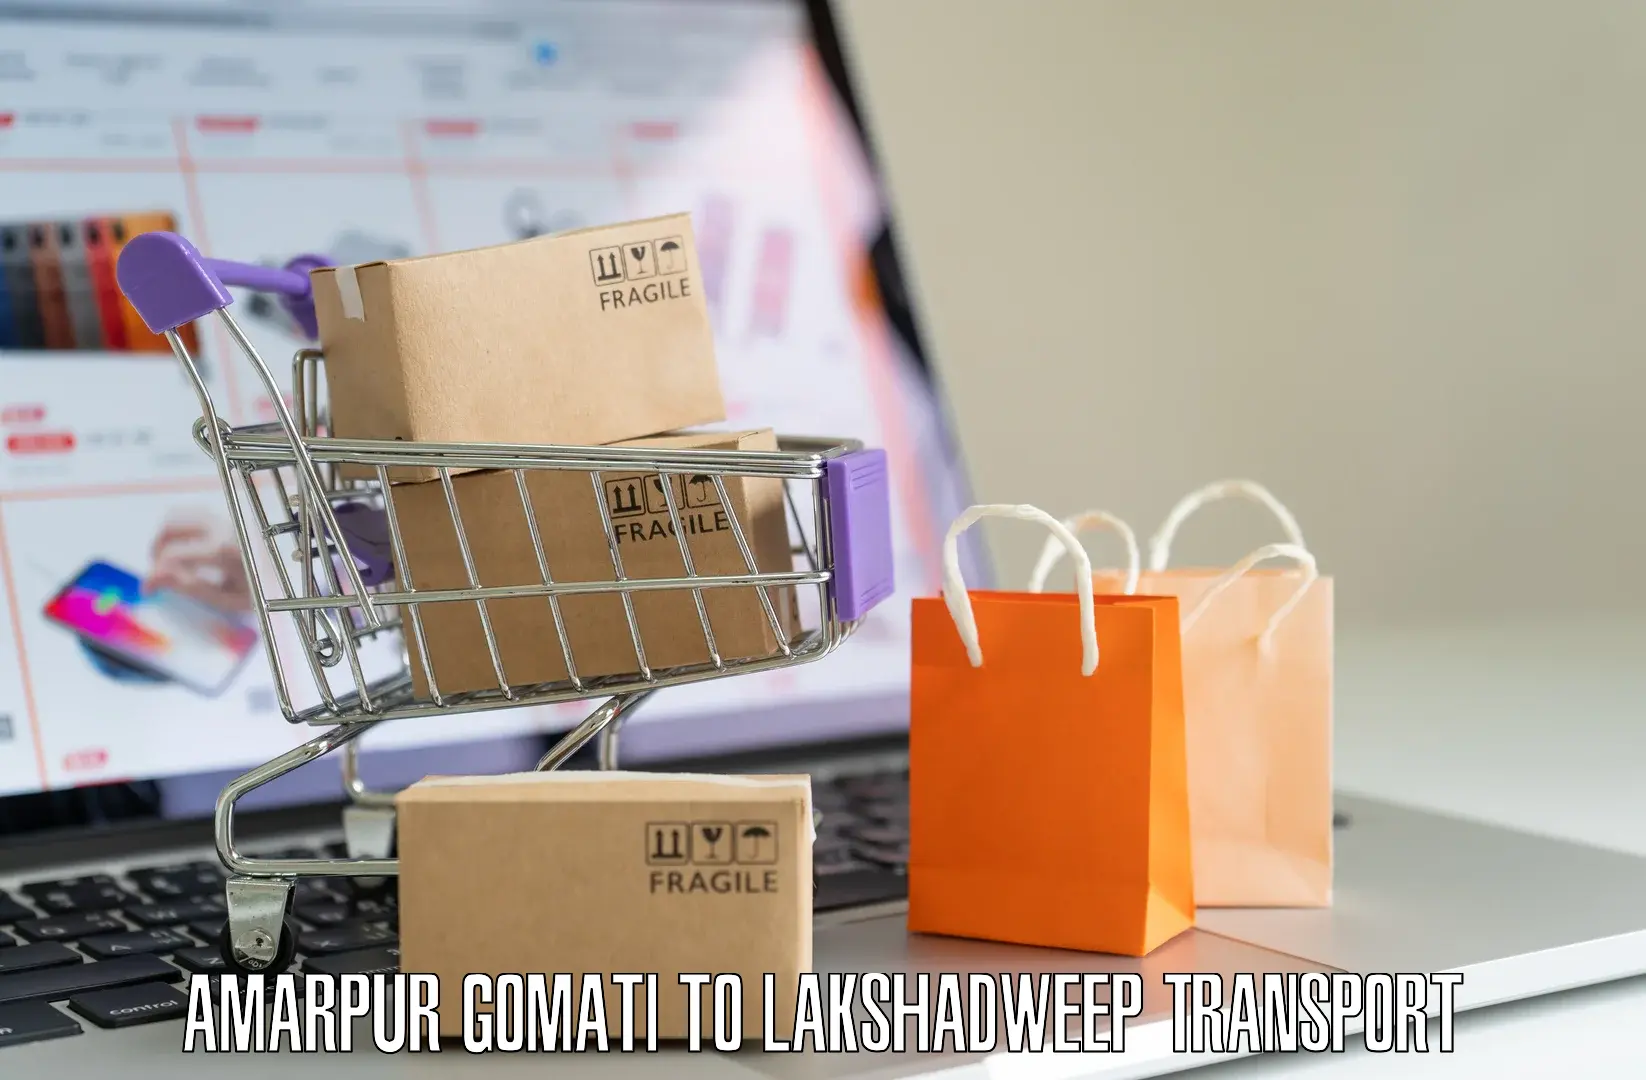 Road transport online services in Amarpur Gomati to Lakshadweep